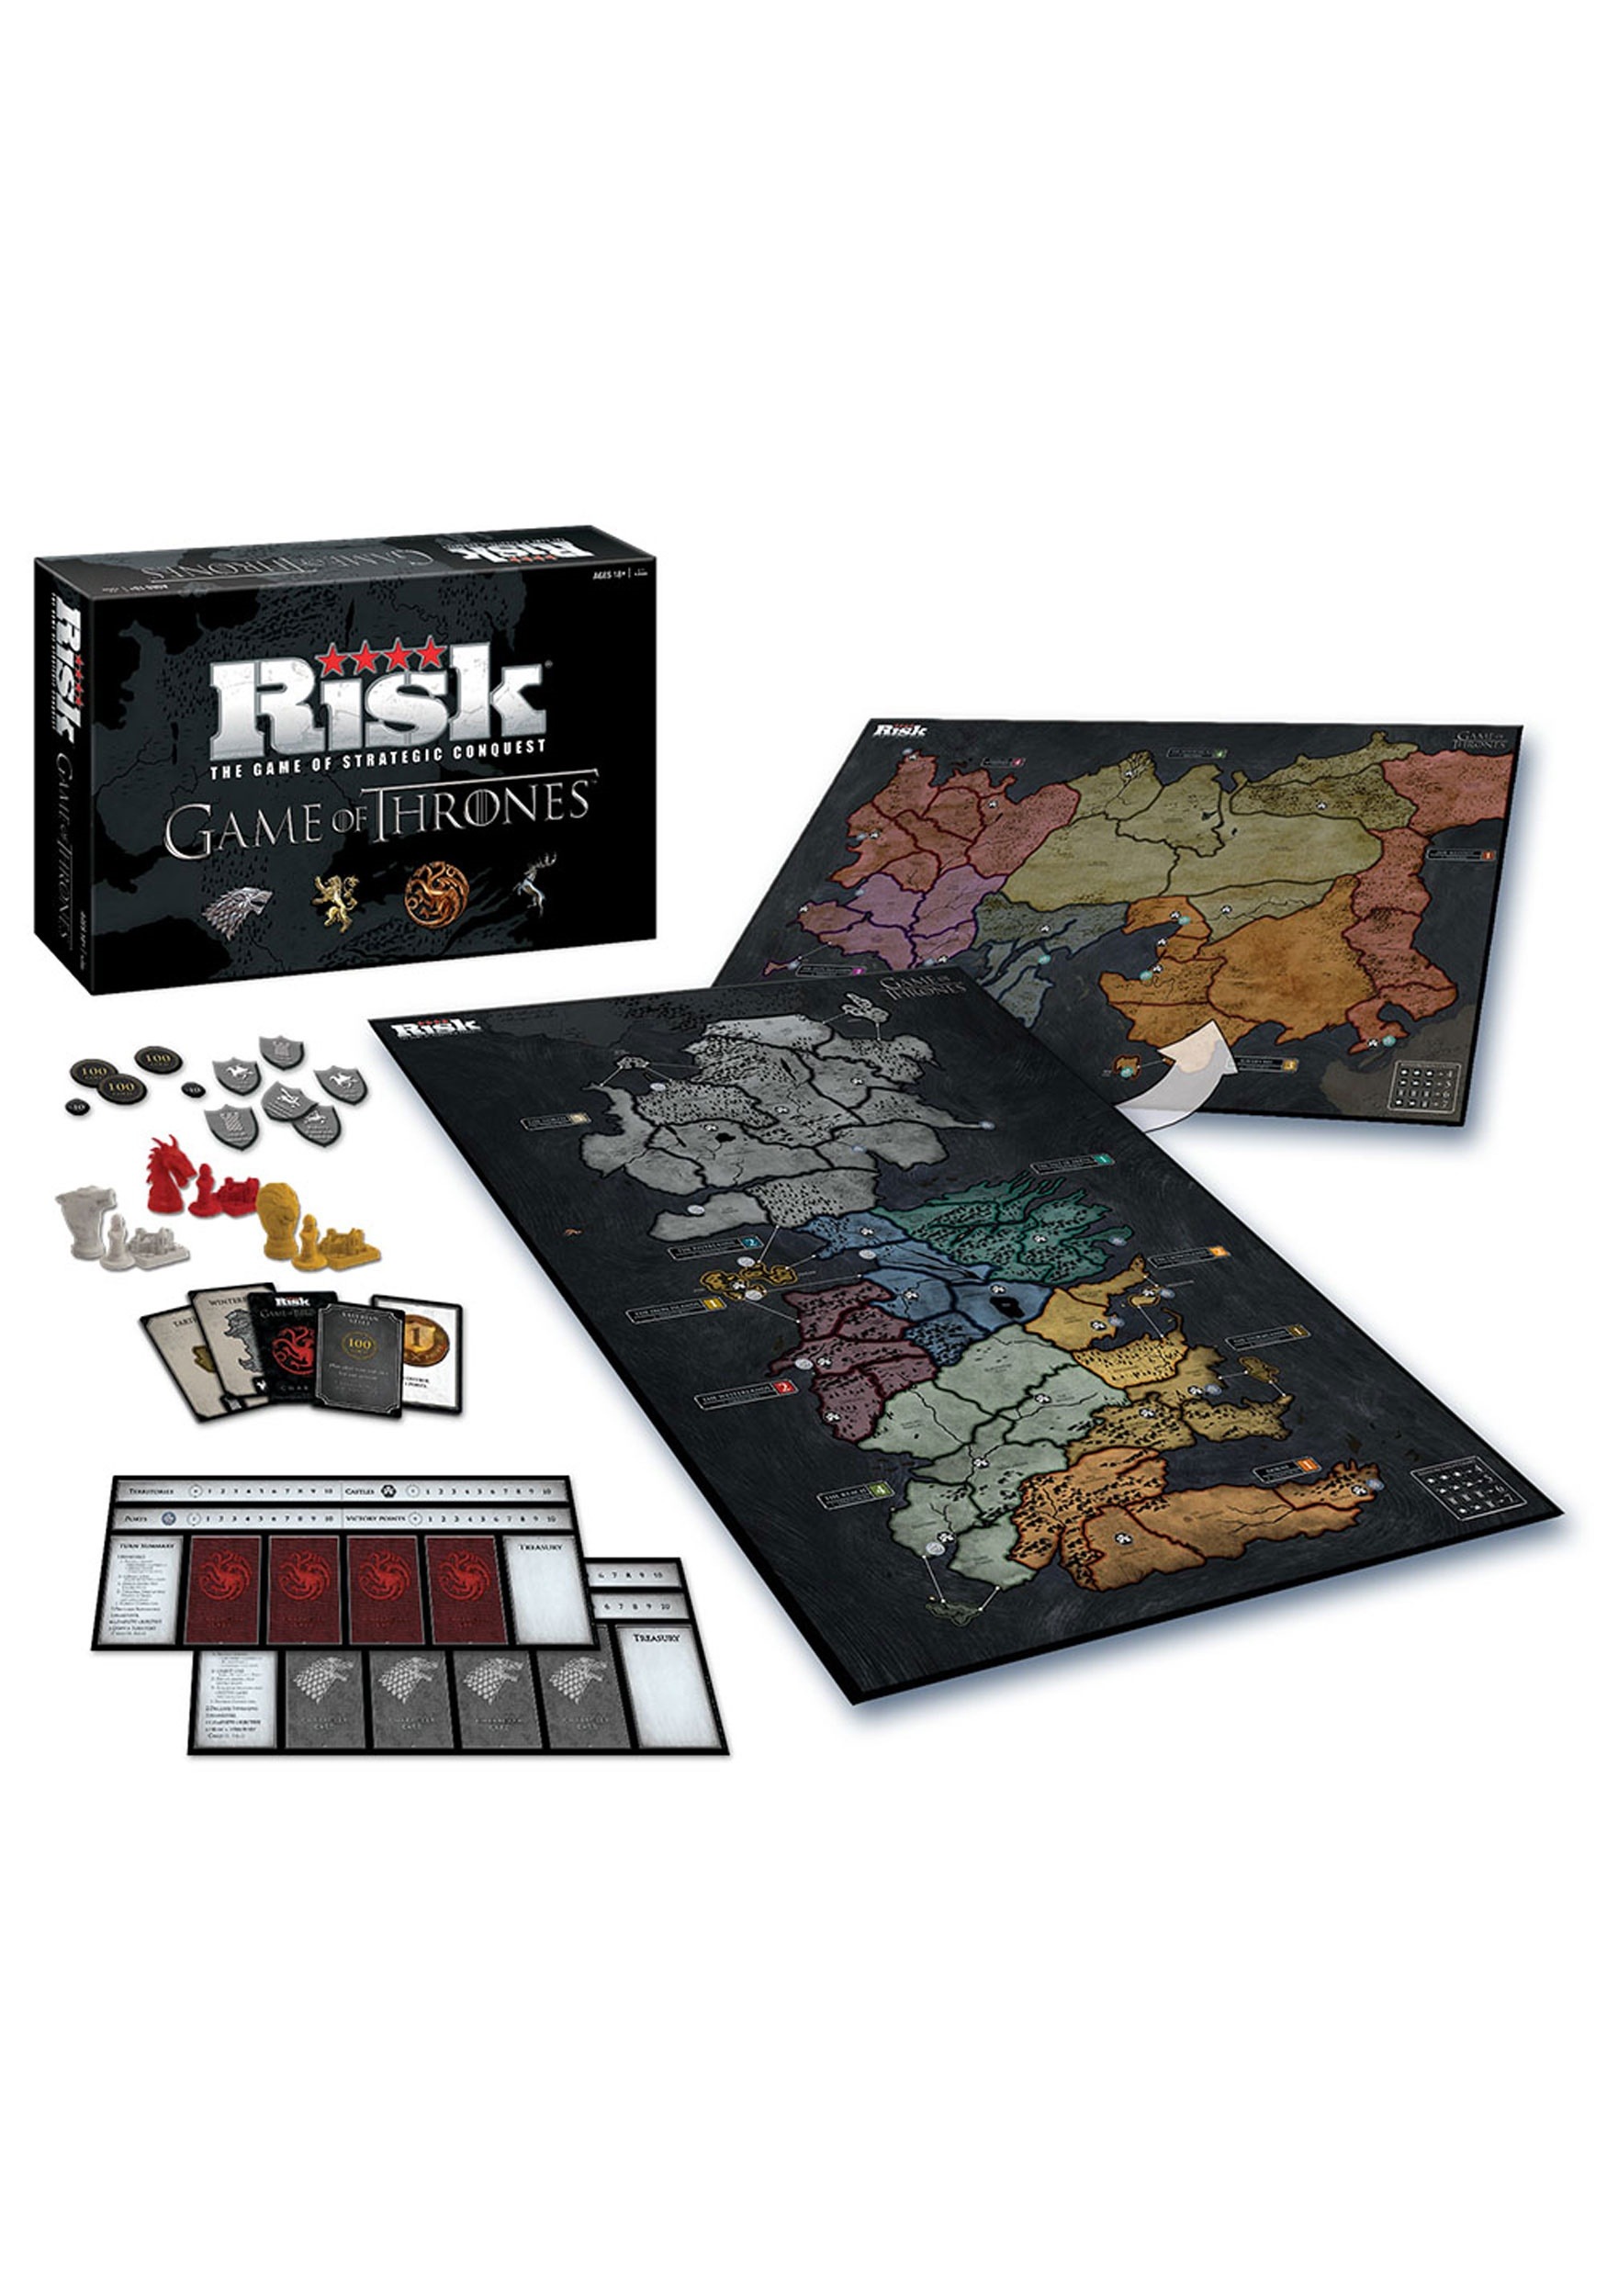 Image of USAopoly Game of Thrones Edition - RISK